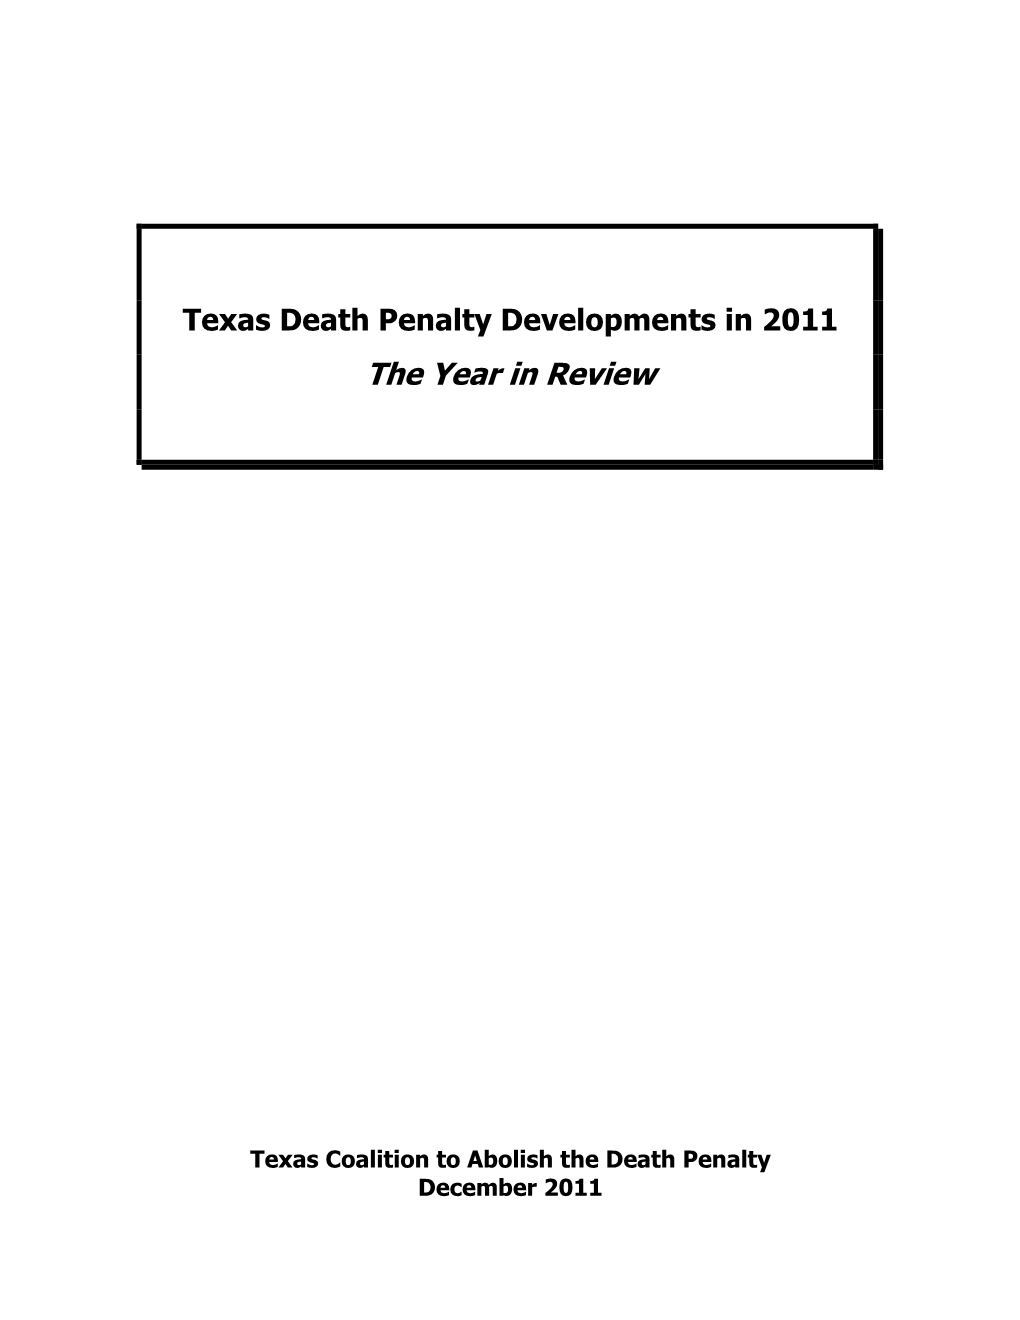 Texas Death Penalty Developments in 2011: the Year in Review